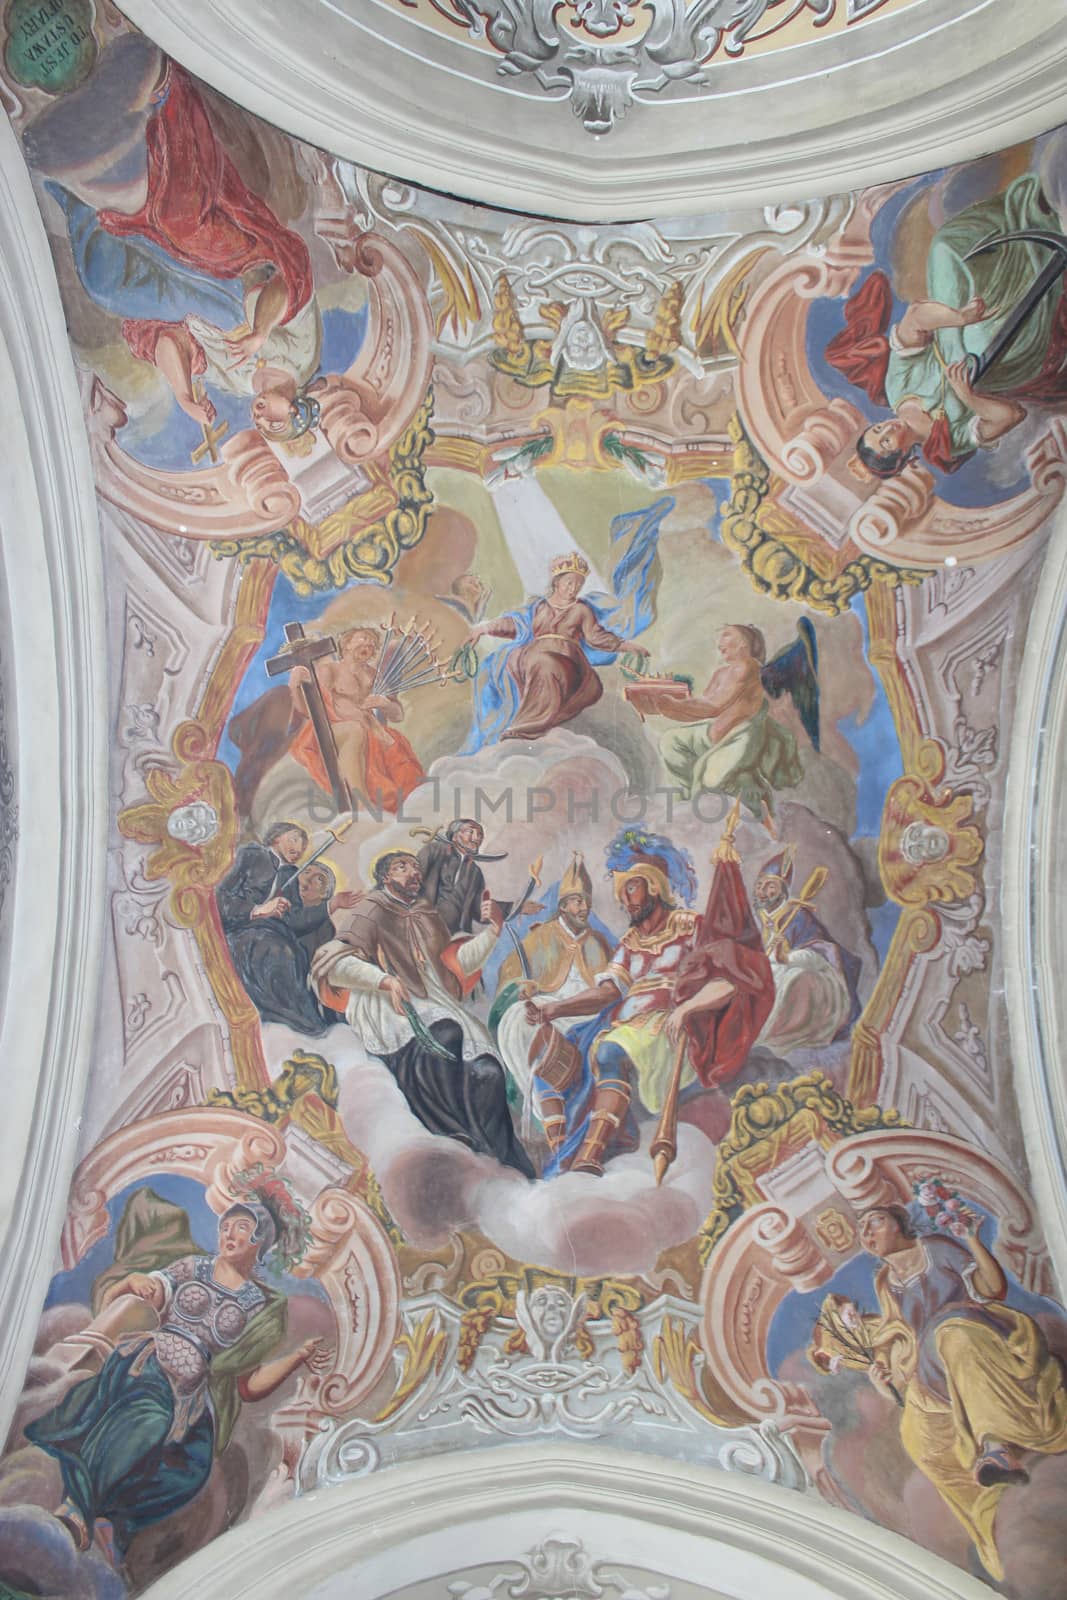 magnificent paints on the ceiling of the church in Lvov